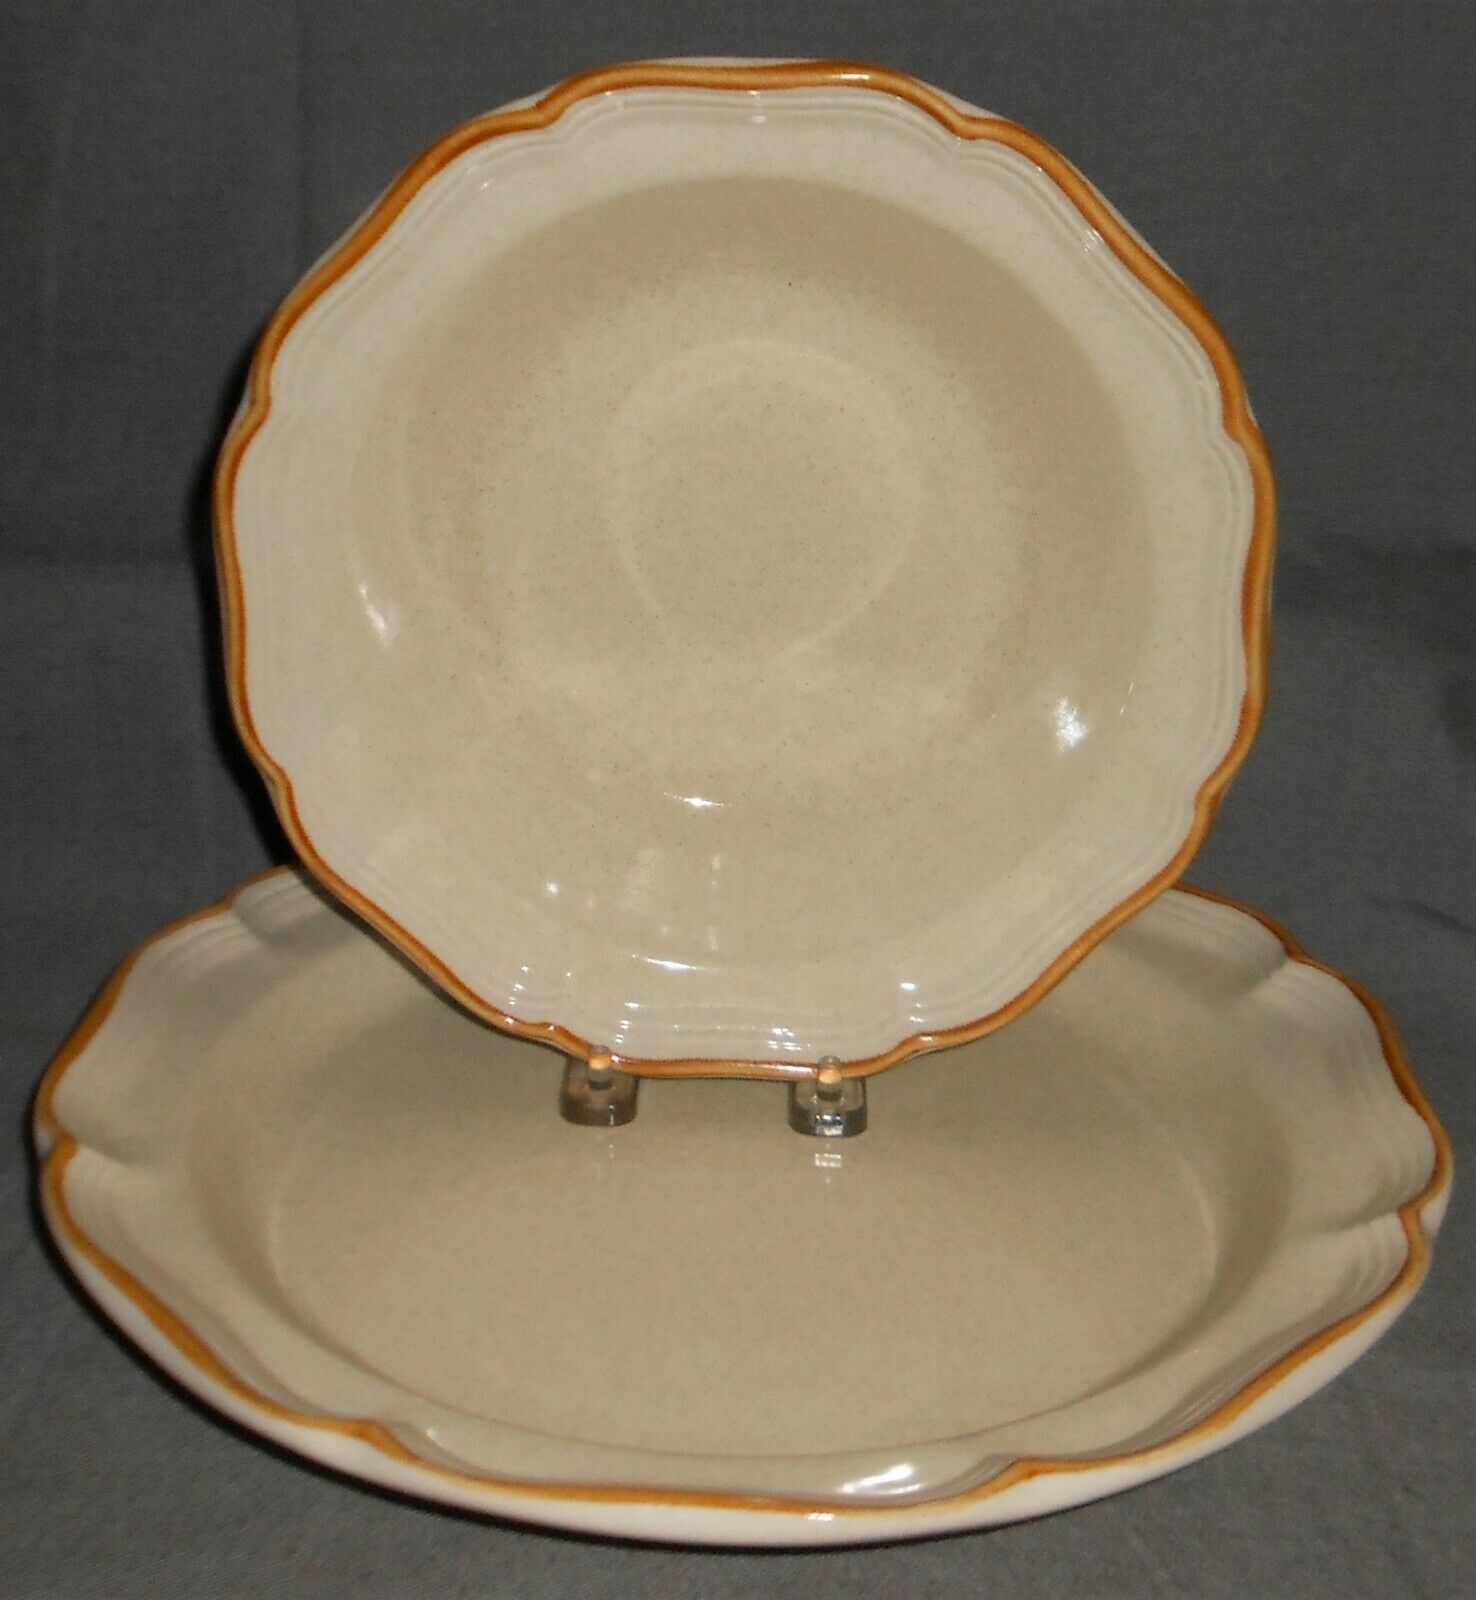 Primary image for Set (2) Mikasa GARDEN CLUB PATTERN Serving Bowl & Platter MADE IN JAPAN